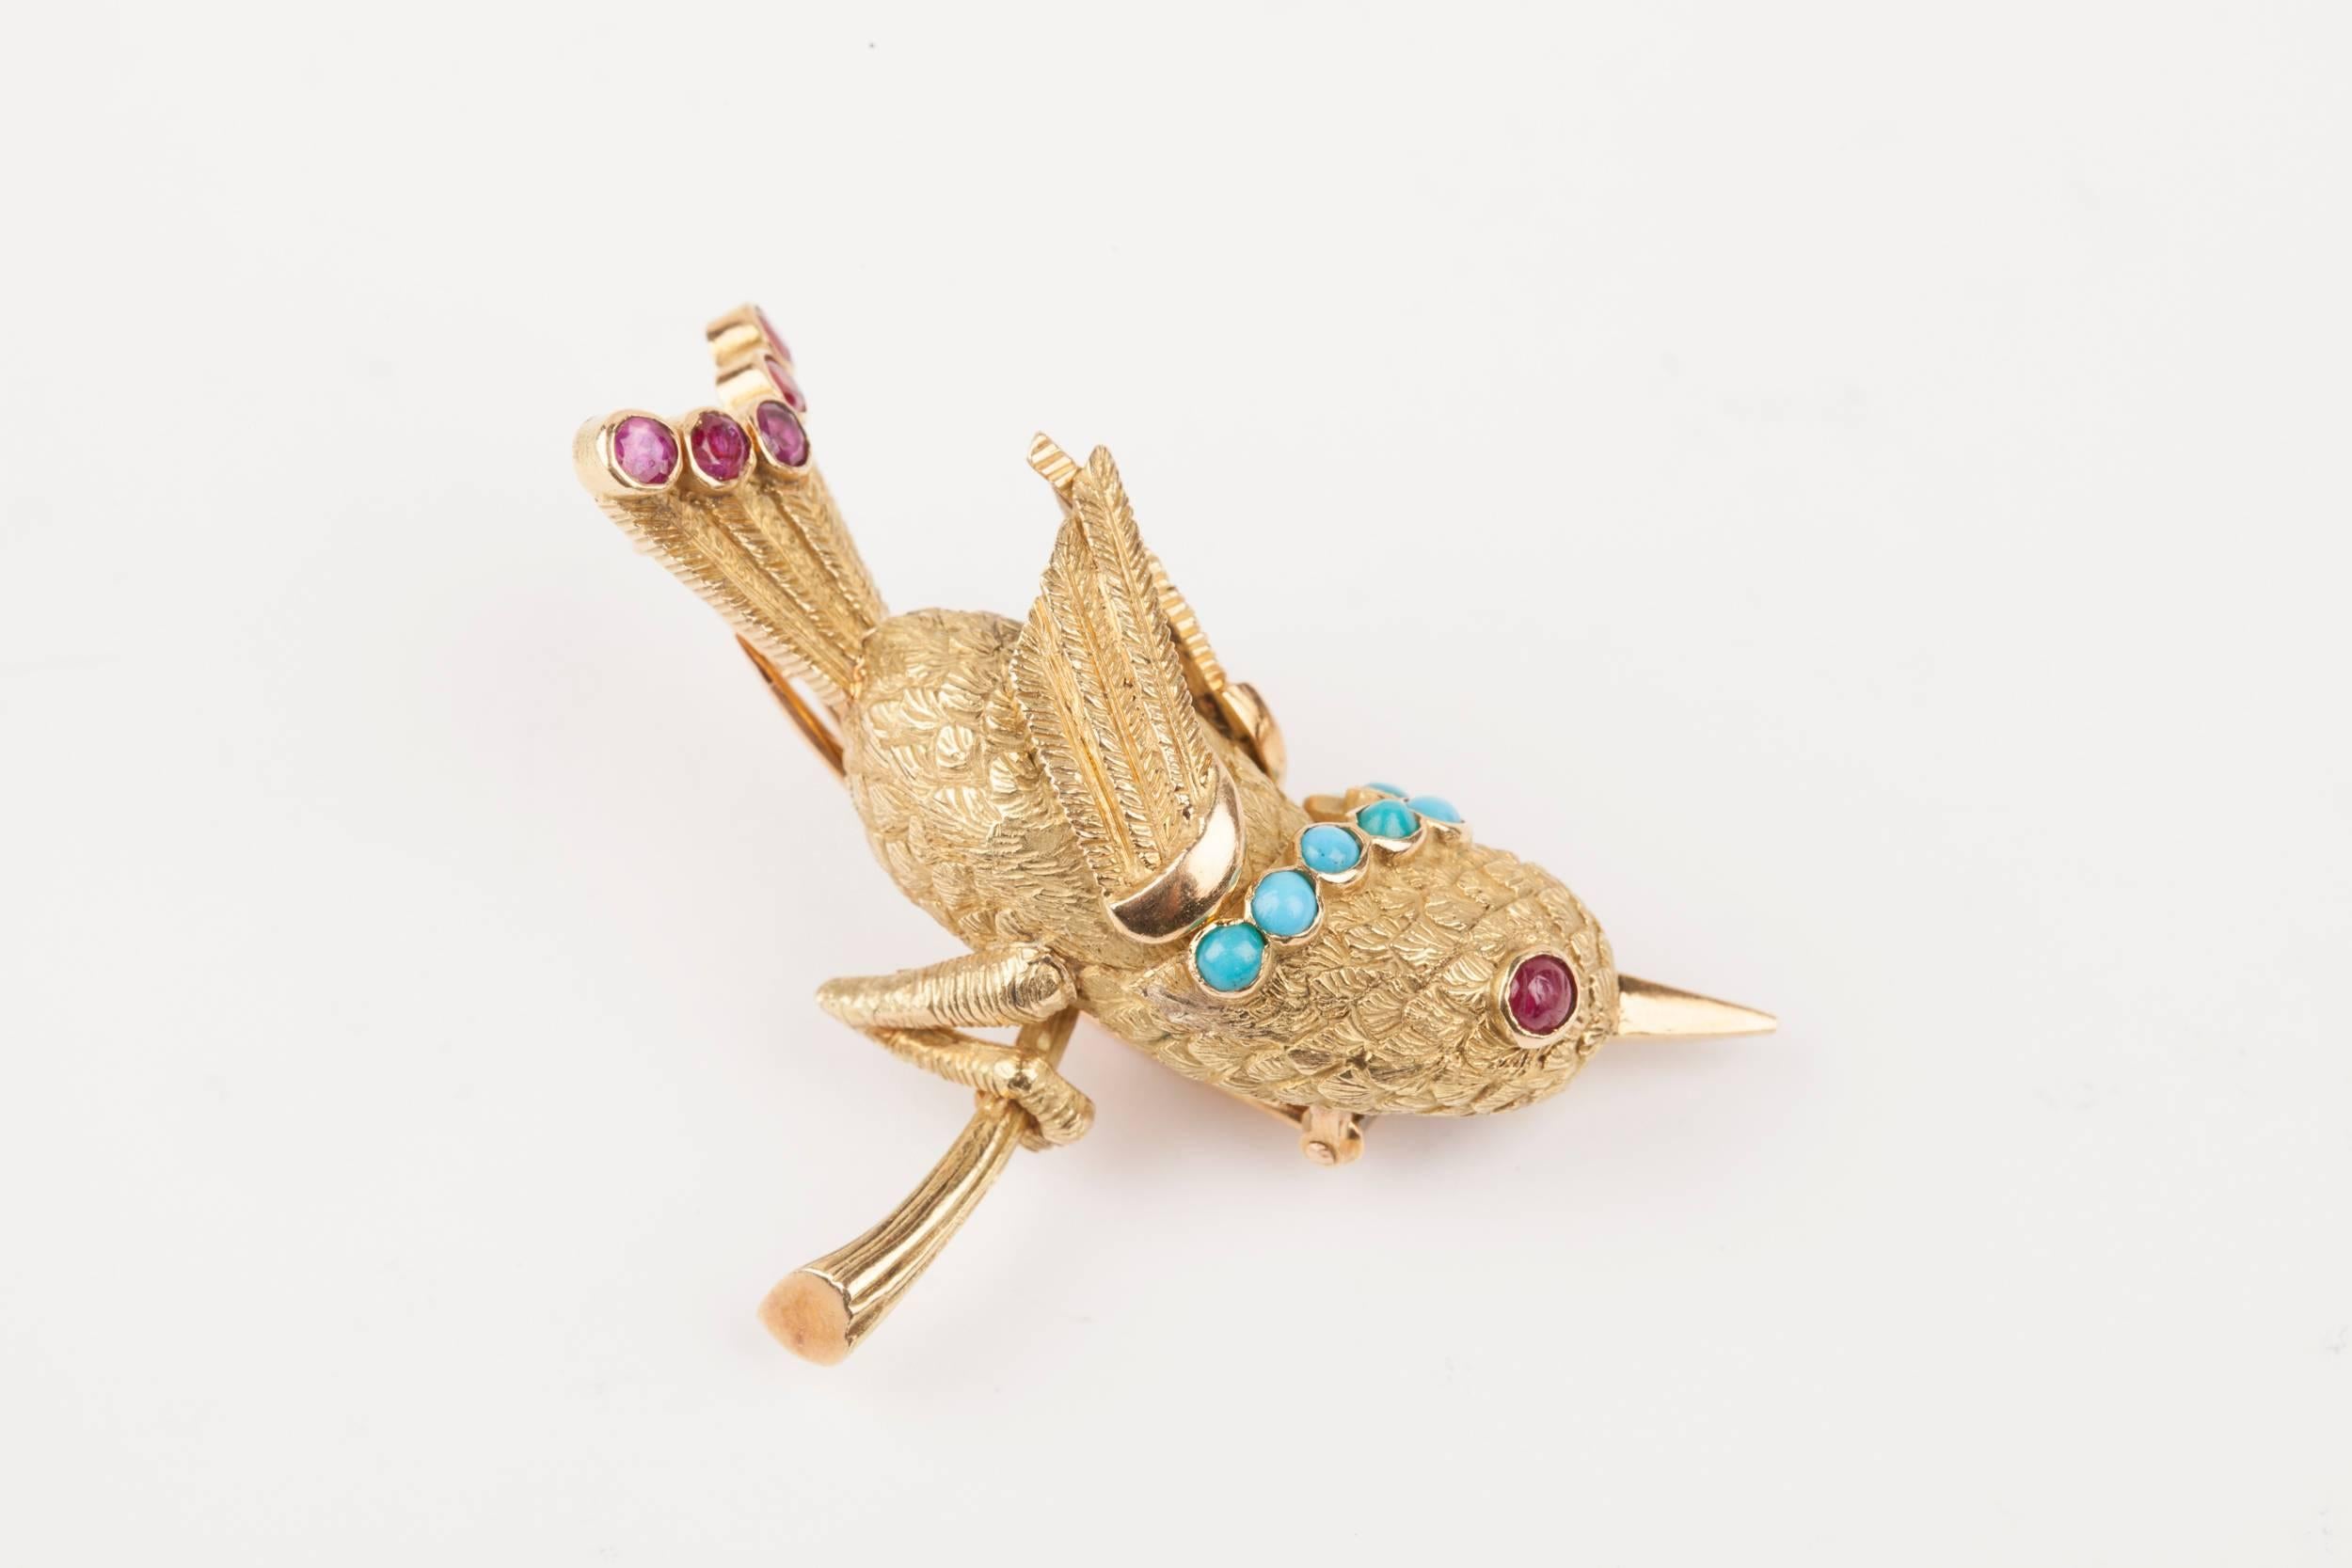 Beautiful bird brooch in gold 18k, set with turquoises and rubies. French made circa 1960.
Weights: 12.80 grams
